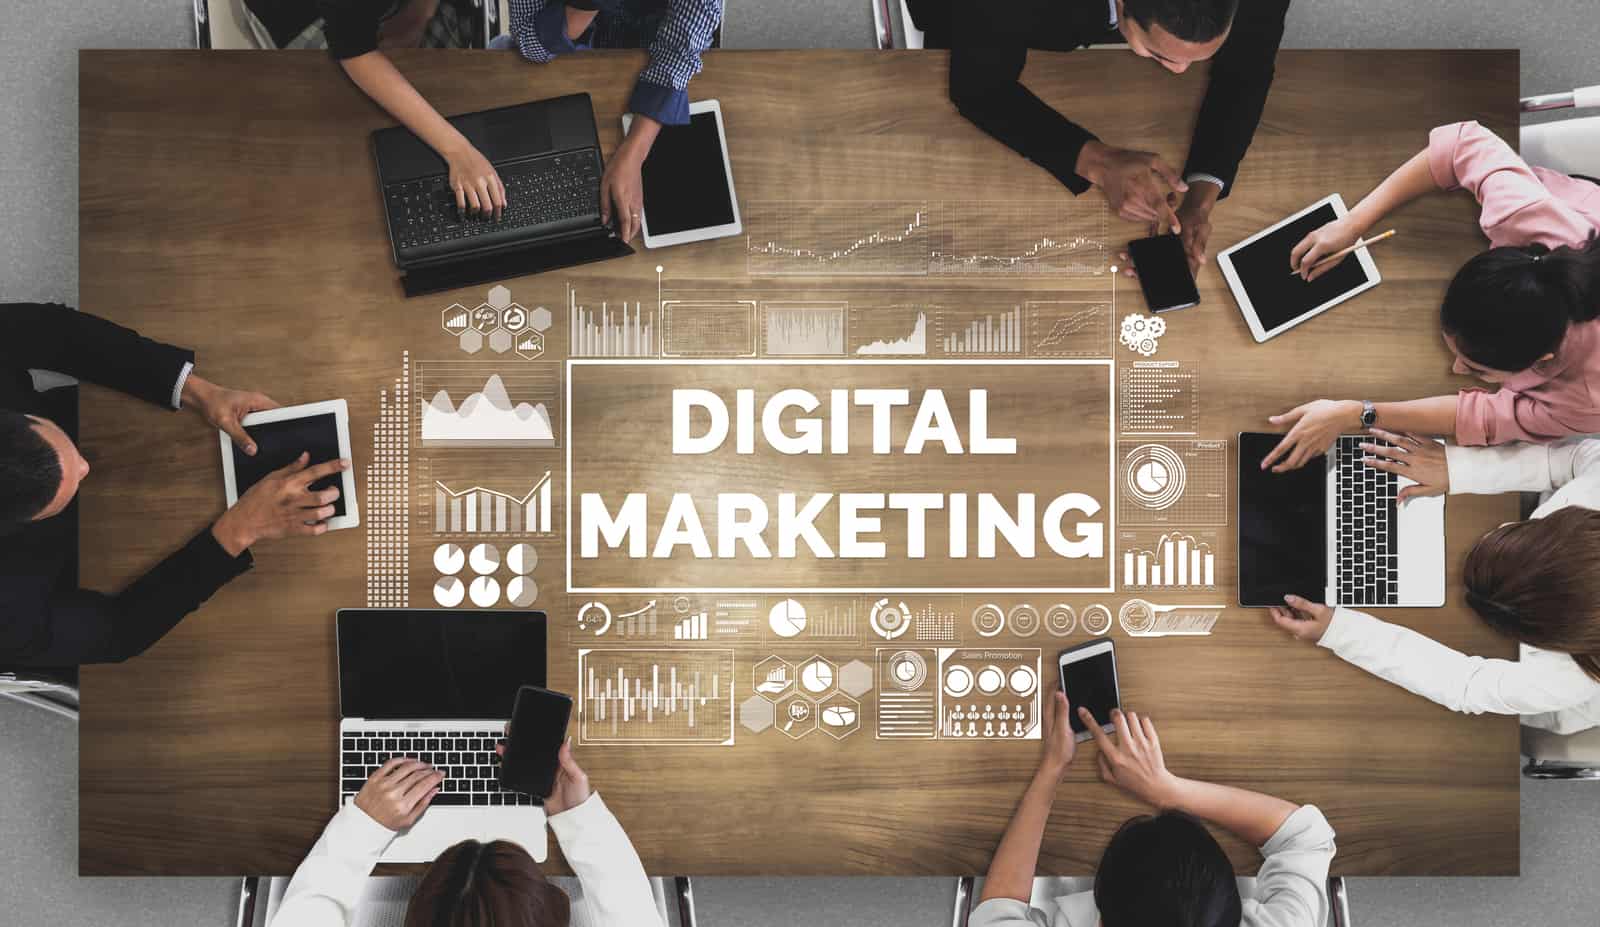 Digital Marketing Tips For Small Business - TechRounder